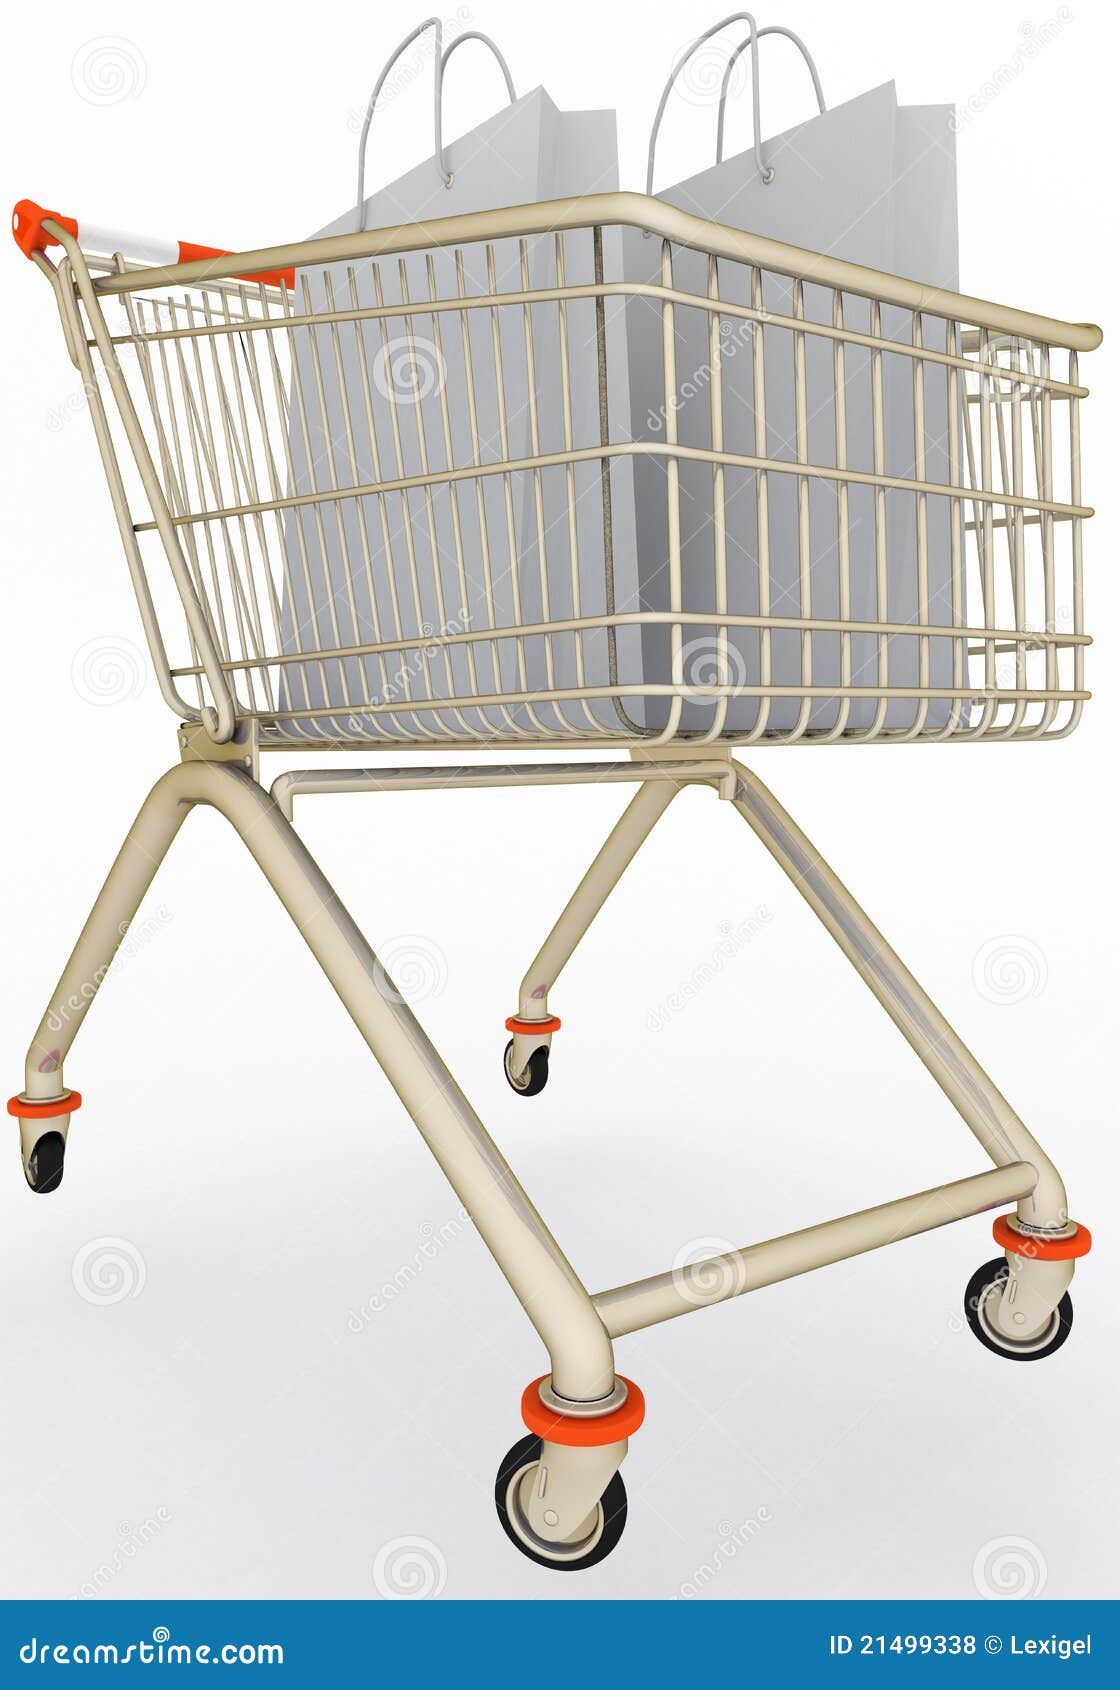 Master thesis about shopping cart